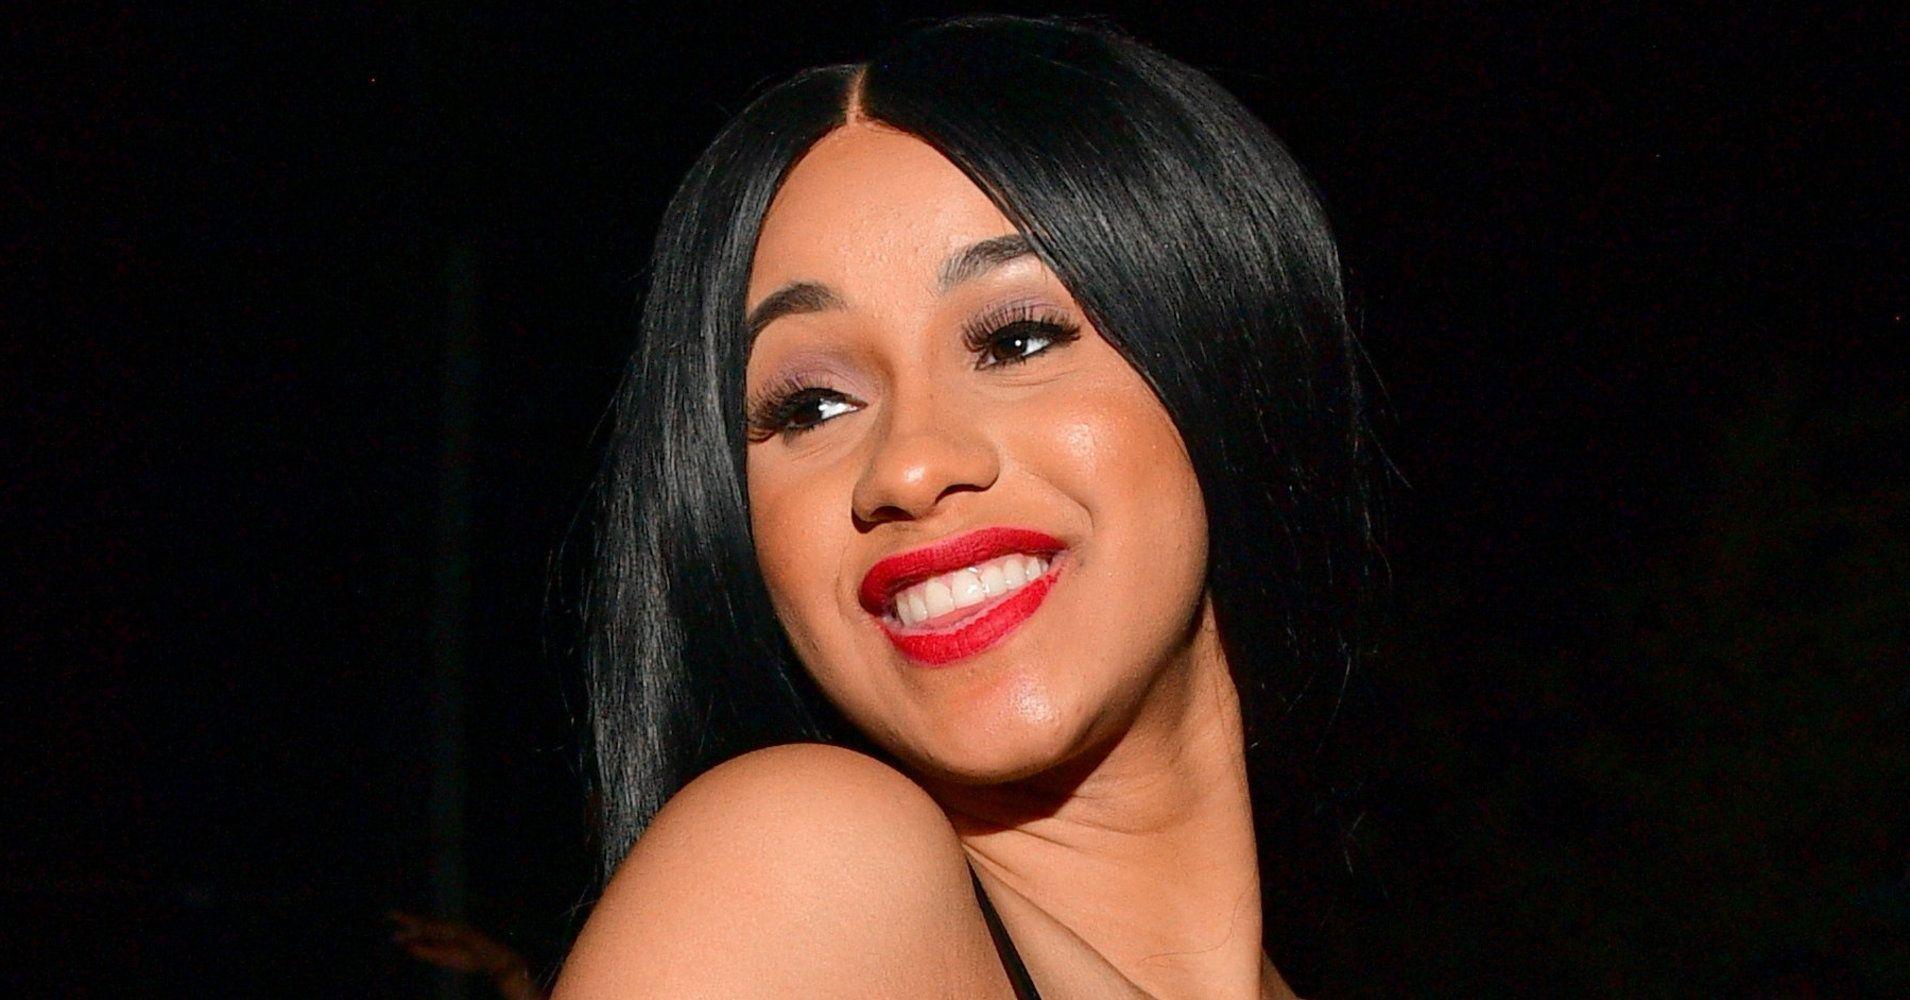 Cardi B Is The First Female Rapper To Hit No. 1 Solo In Almost 20